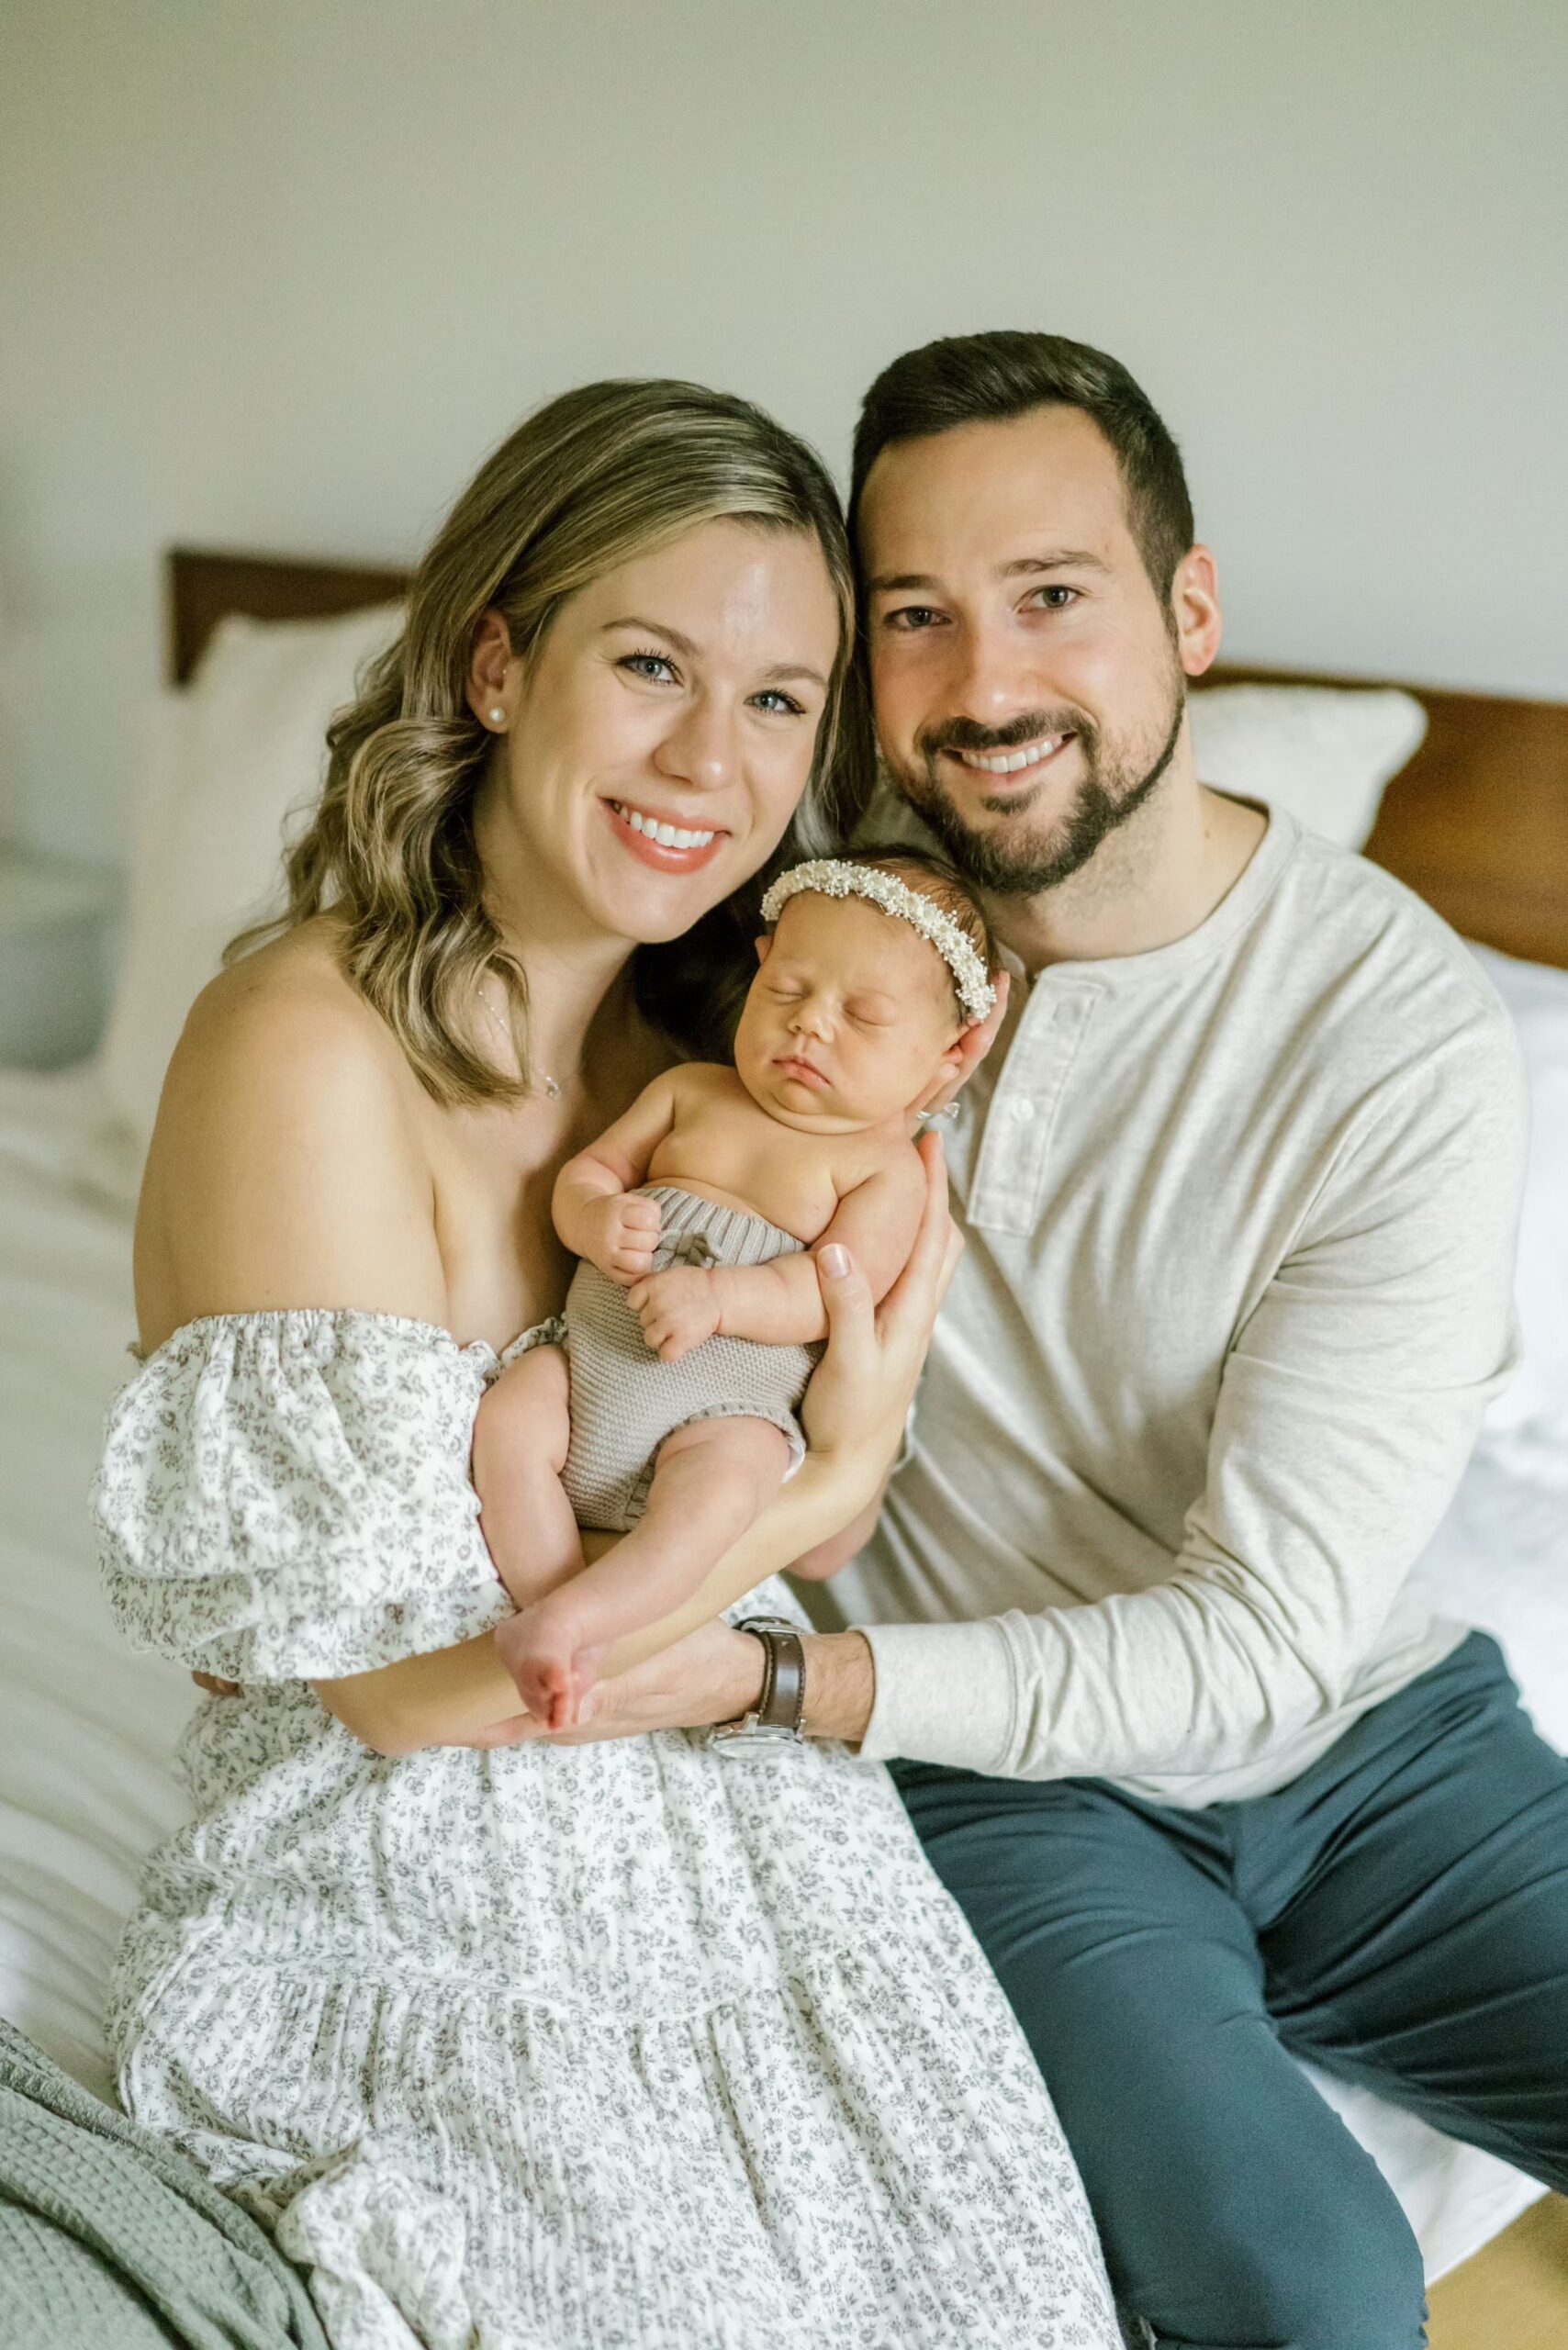 New parents smile at camera with newborn